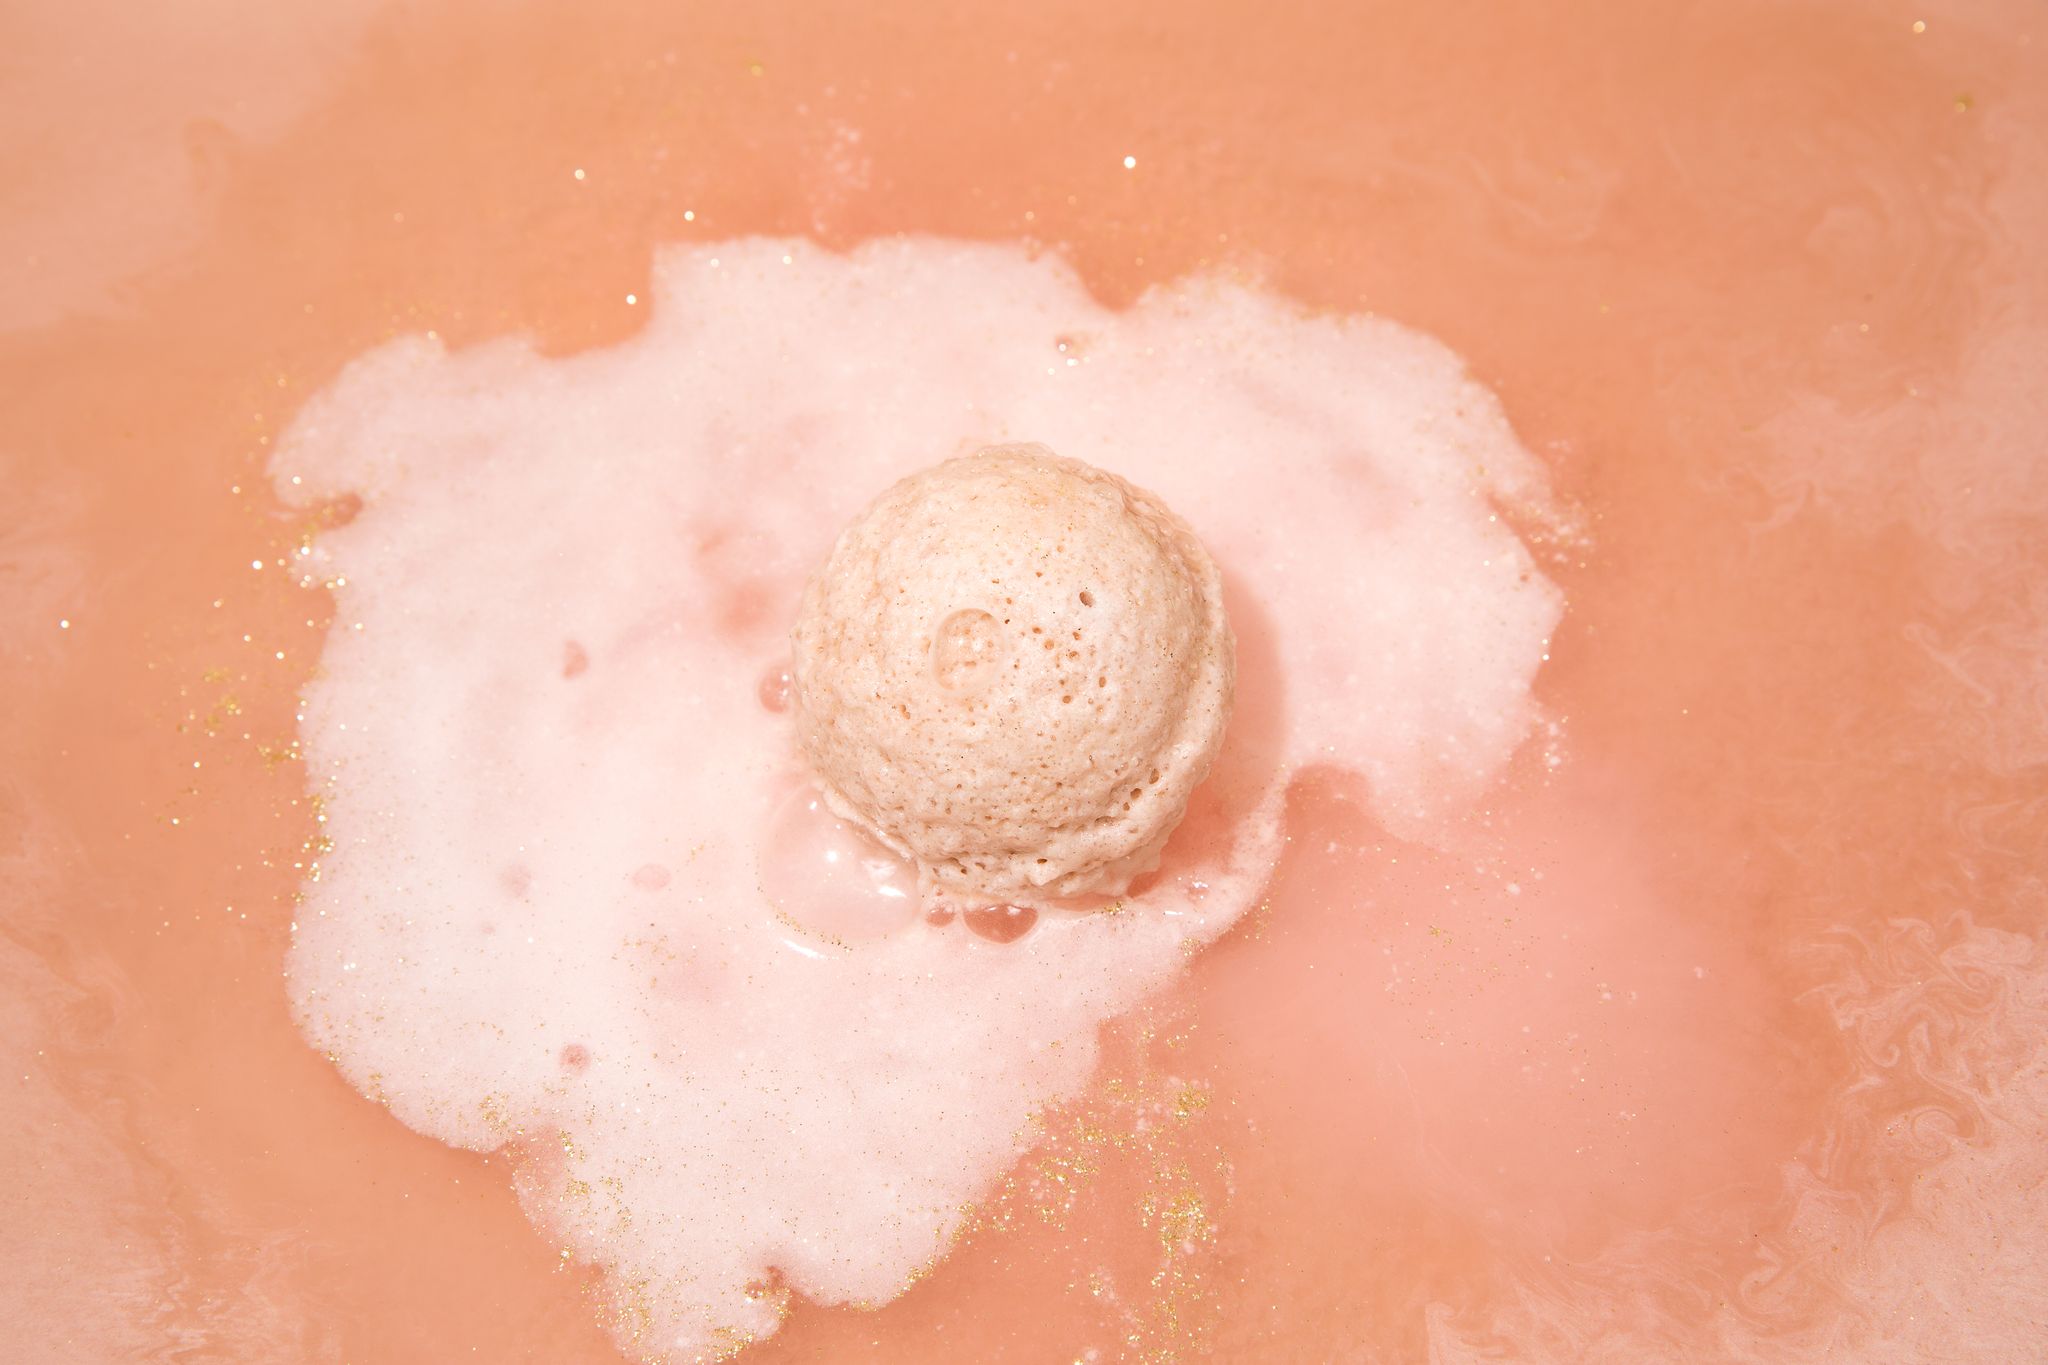 Daily Delight or Disaster: Can You Use Bath Bombs Every Day?